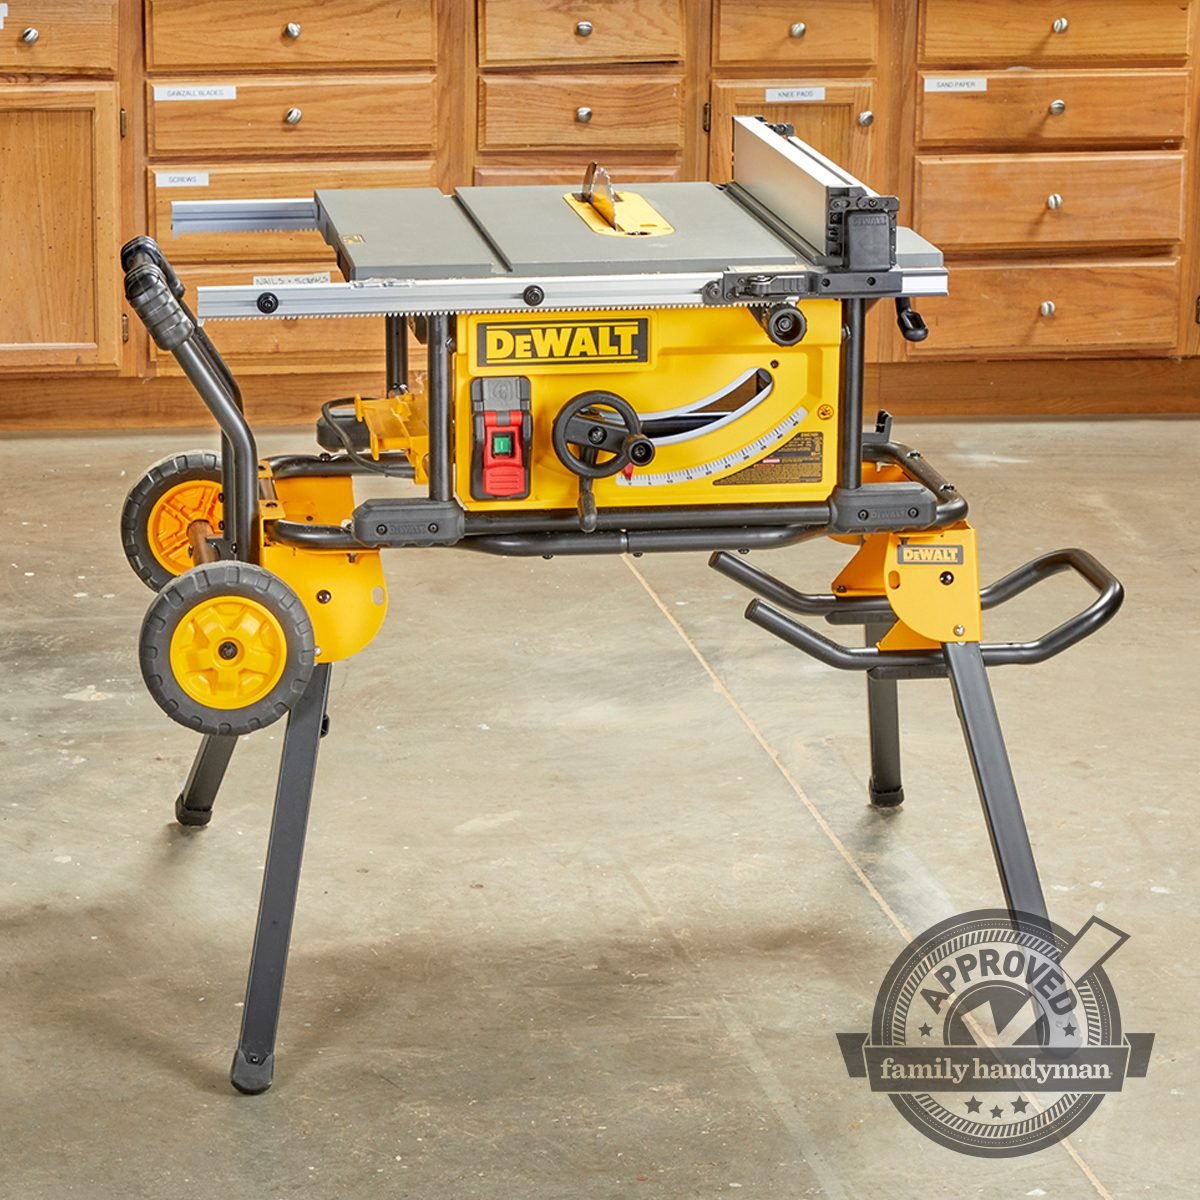 DeWalt 10Inch Portable Table Saw Review We Approve!